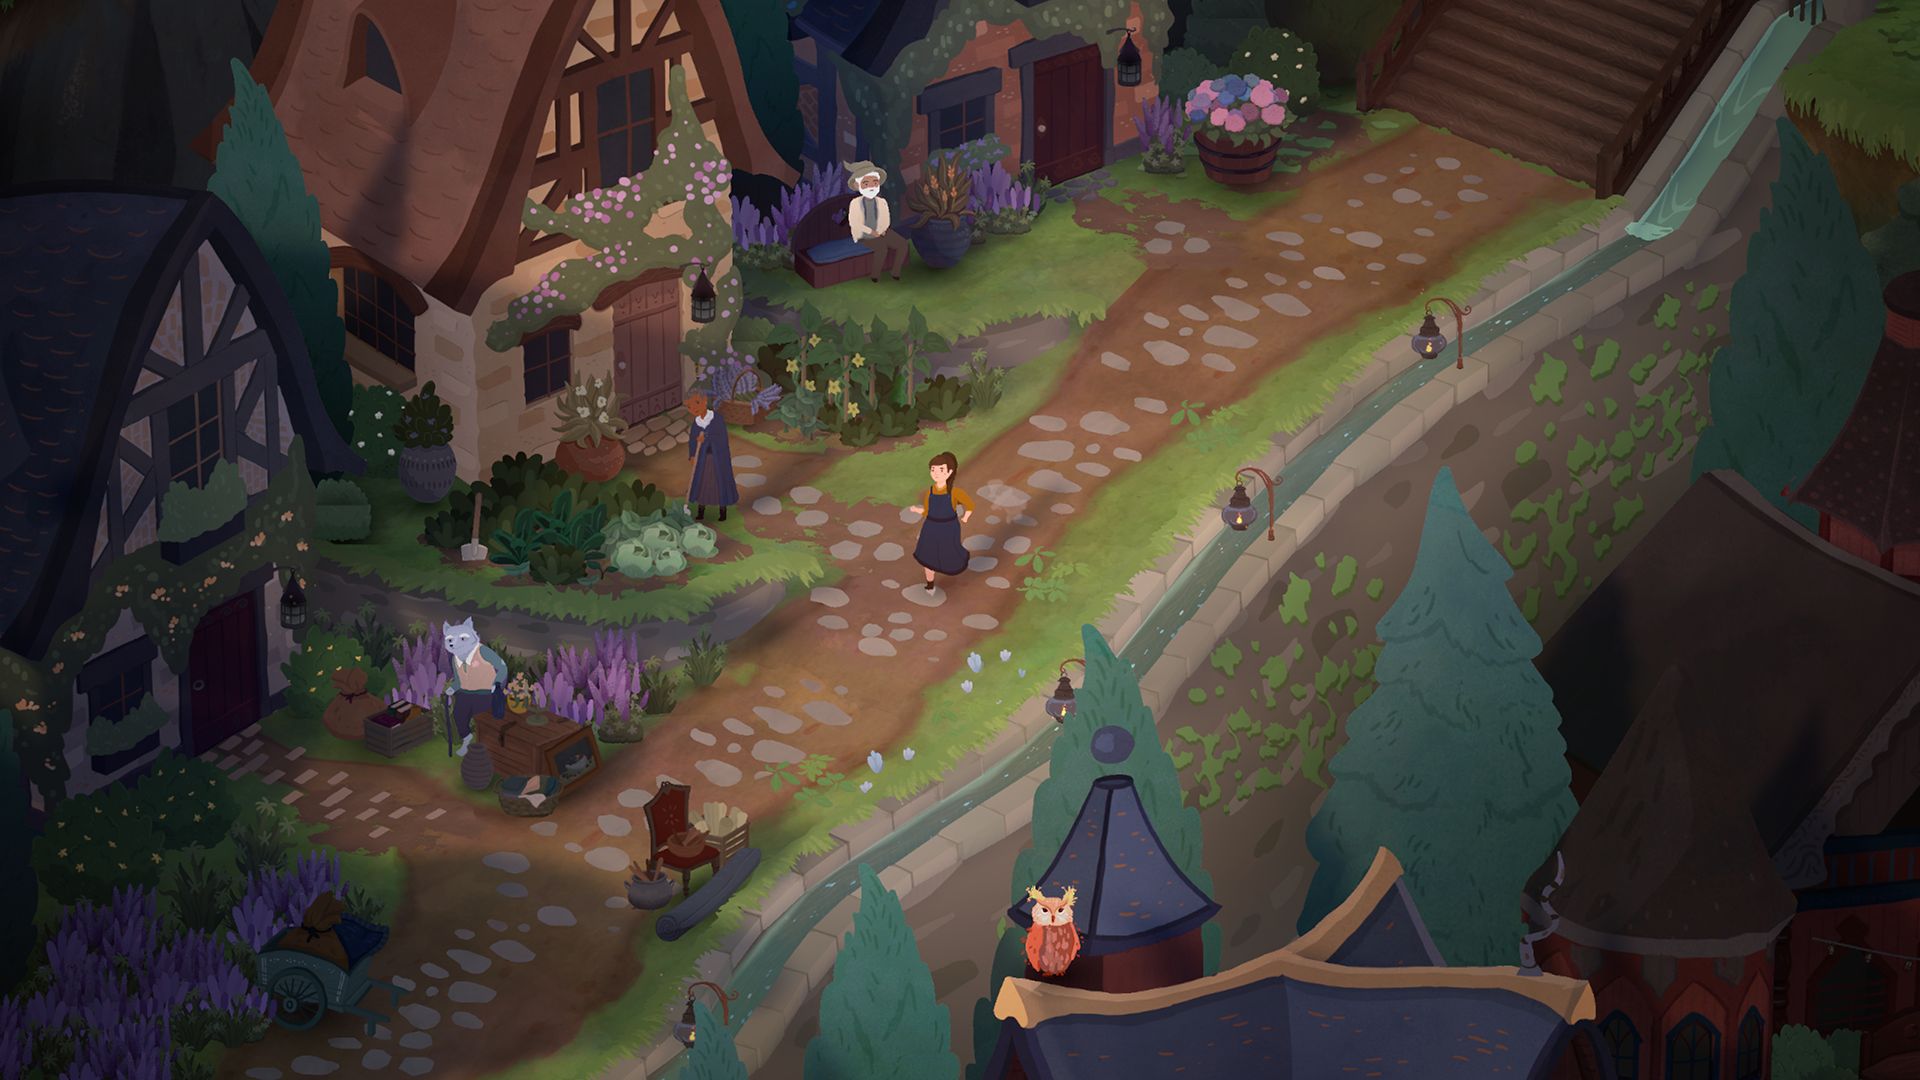 A screenshot from Songs Of Glimmerwick showing the protagonist walking down a quaint cobbled village street